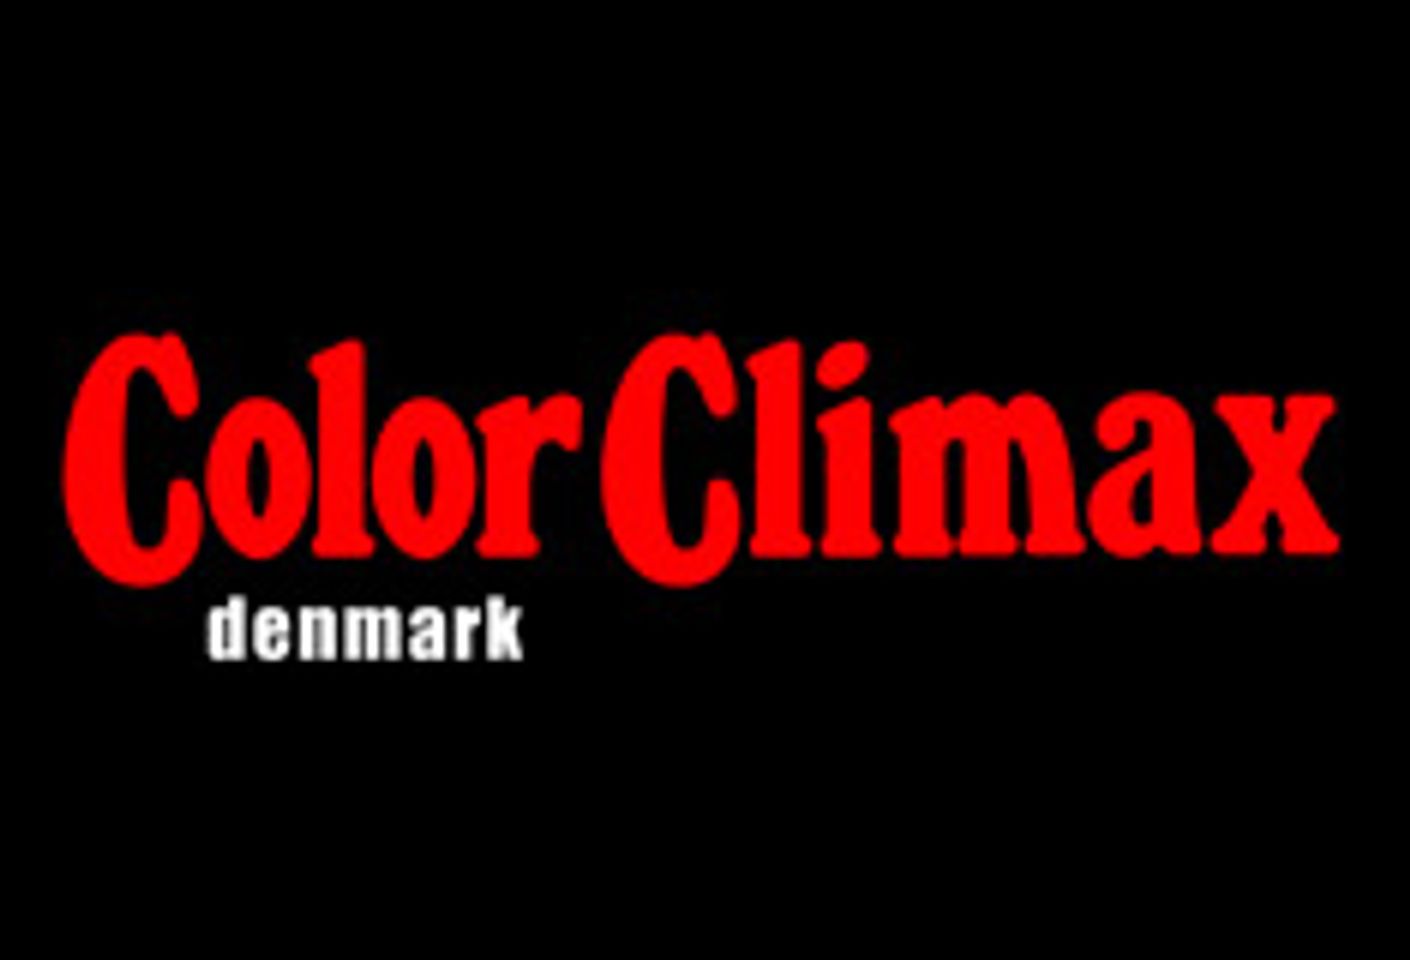 ColorClimax Brings 39 Years of Content Online